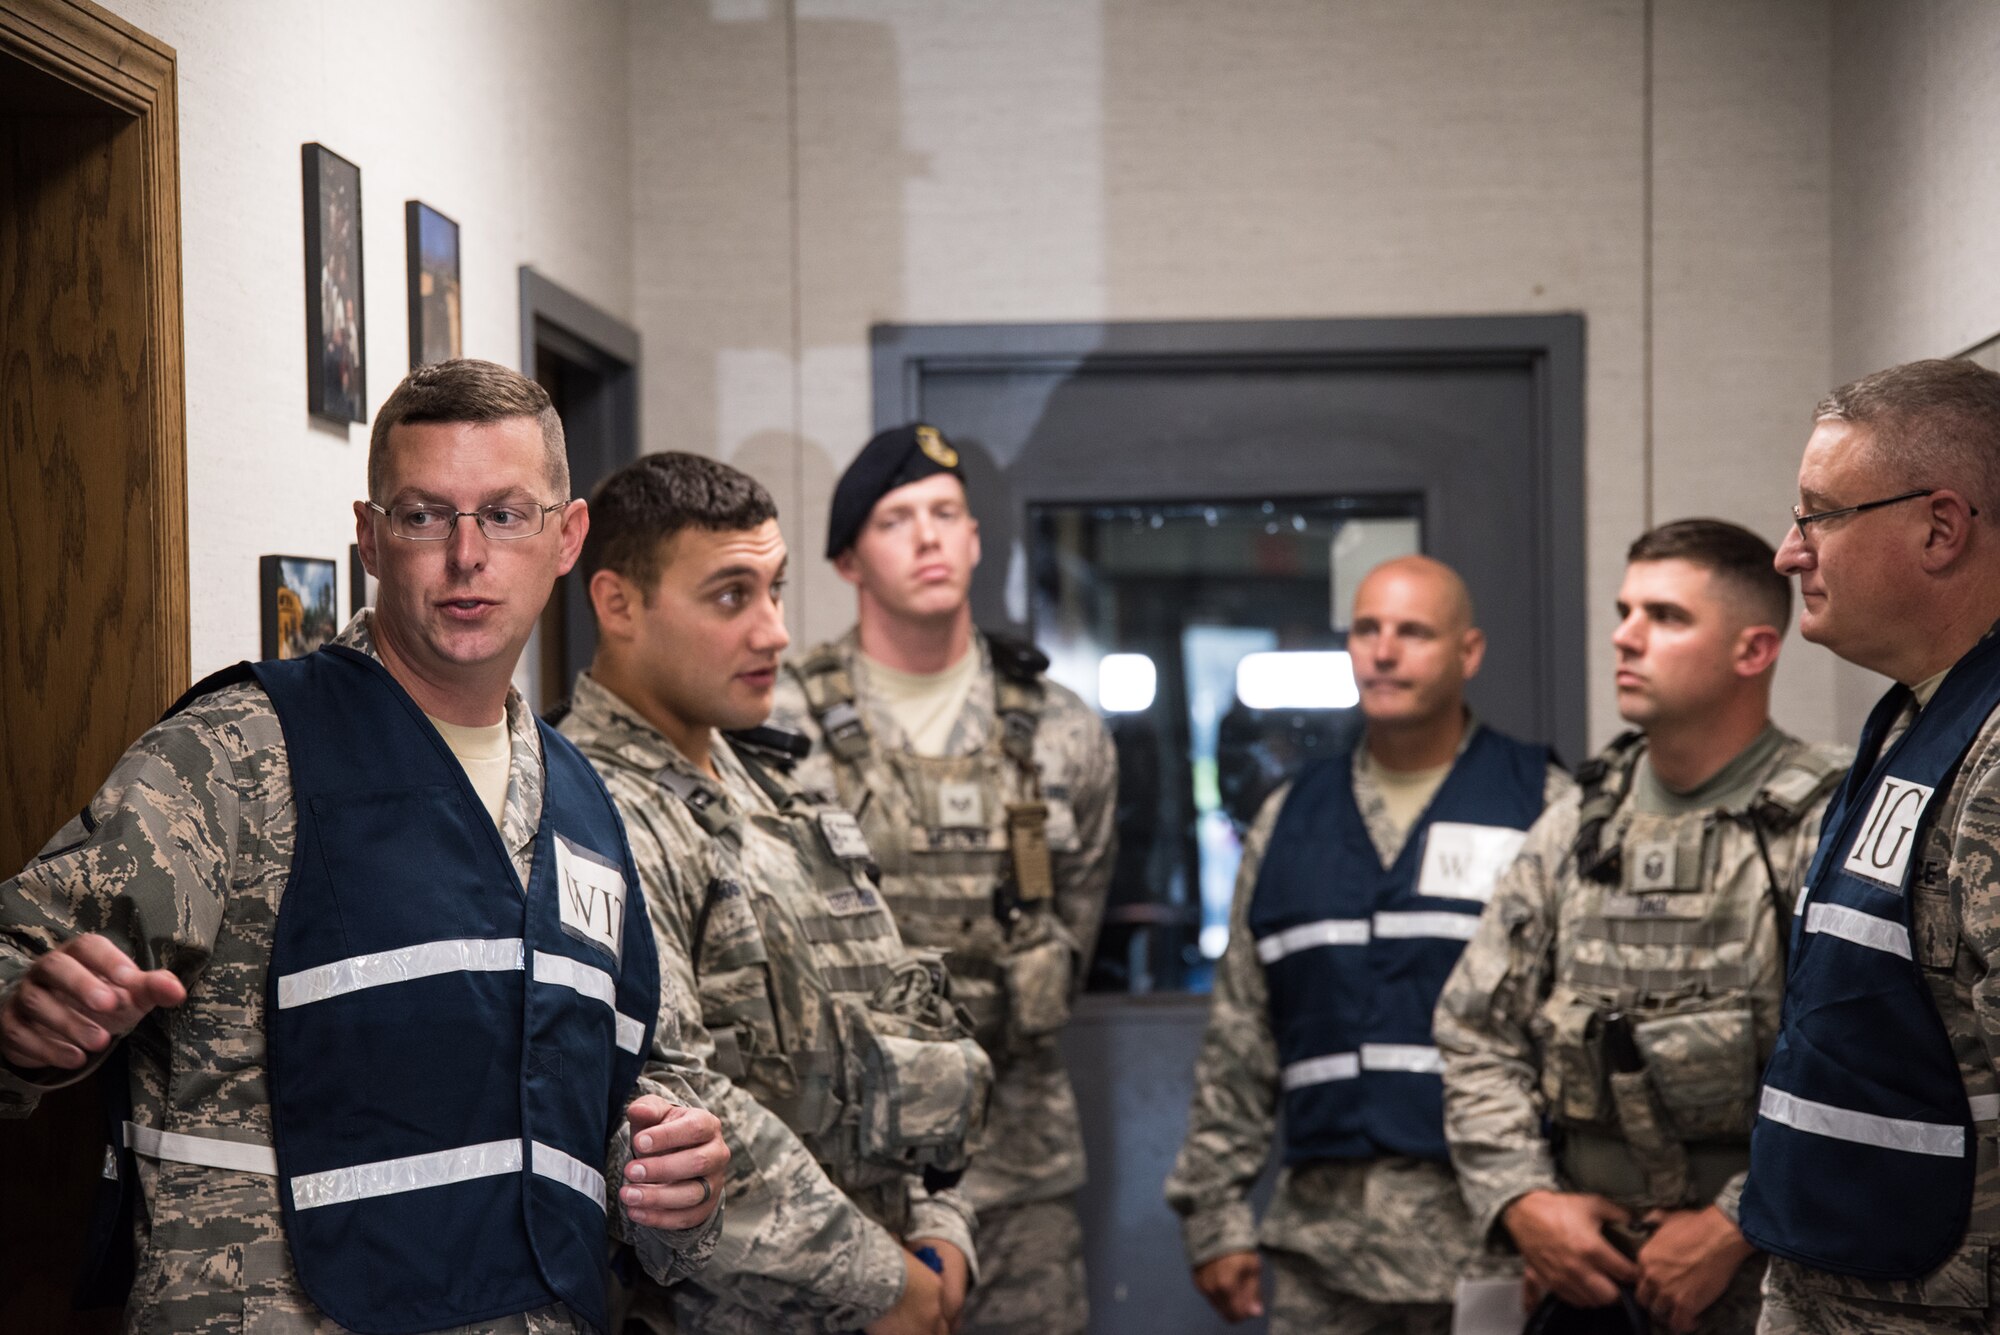 166th Security Forces Airmen gather for an after-action briefing, following an active shooter exercise, at New Castle Air National Guard Base, Aug. 22, 2019. The purpose of this exercise was to provide members of the 166th Airlift Wing with a greater awareness and understanding of possible threats, as well as test their ability to respond properly in the event of an active shooter situation. (U.S. Air National Guard Photo by Mr. Mitchell Topal)